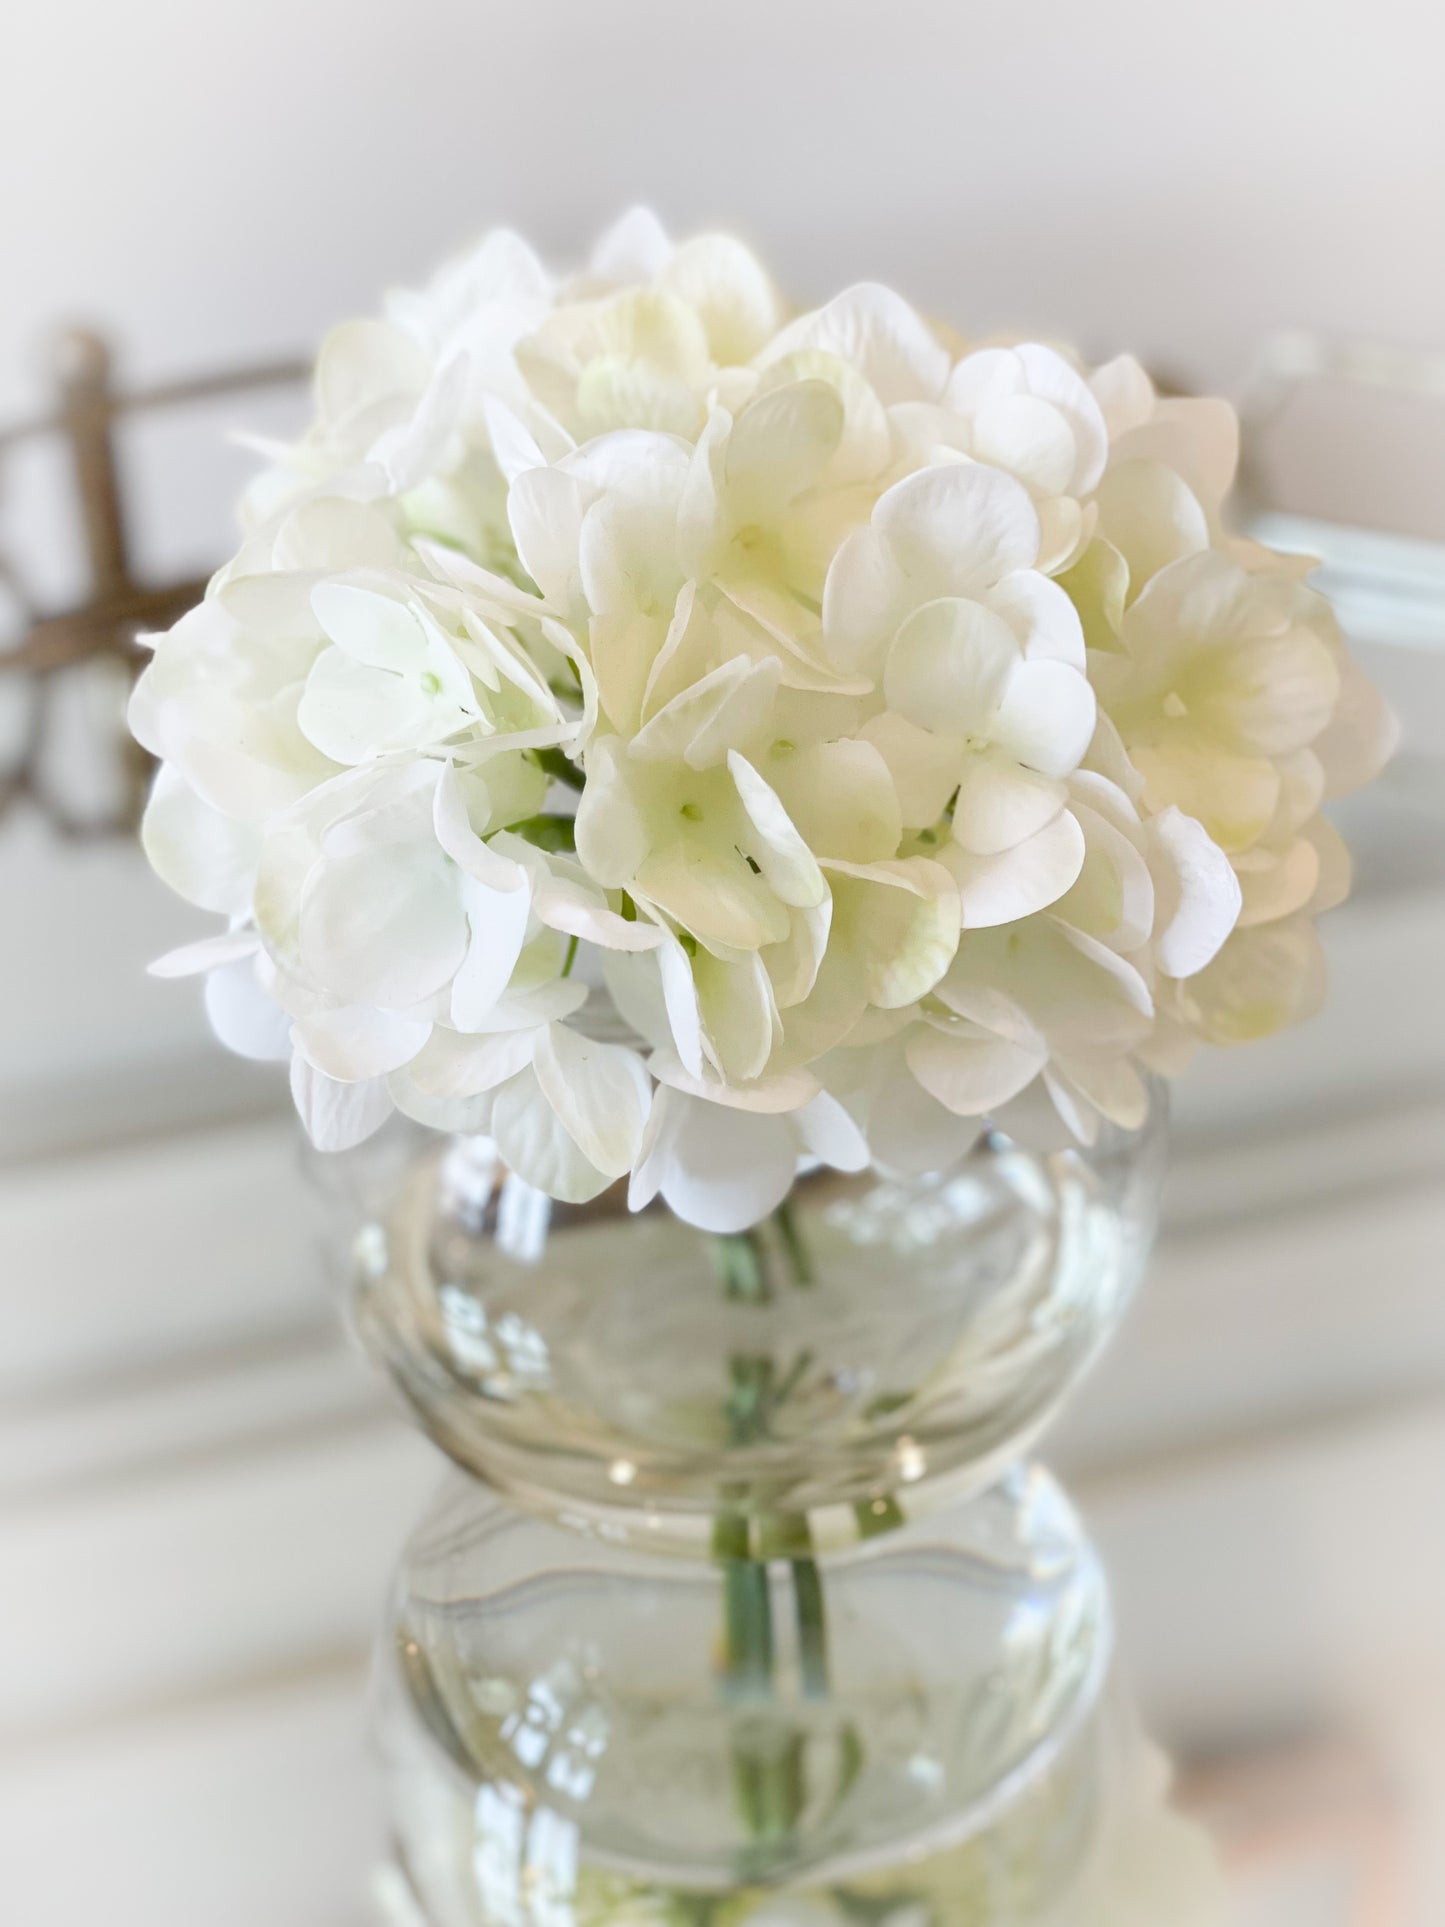 White Hydrangeas In Glass Vase With Acrylic Water